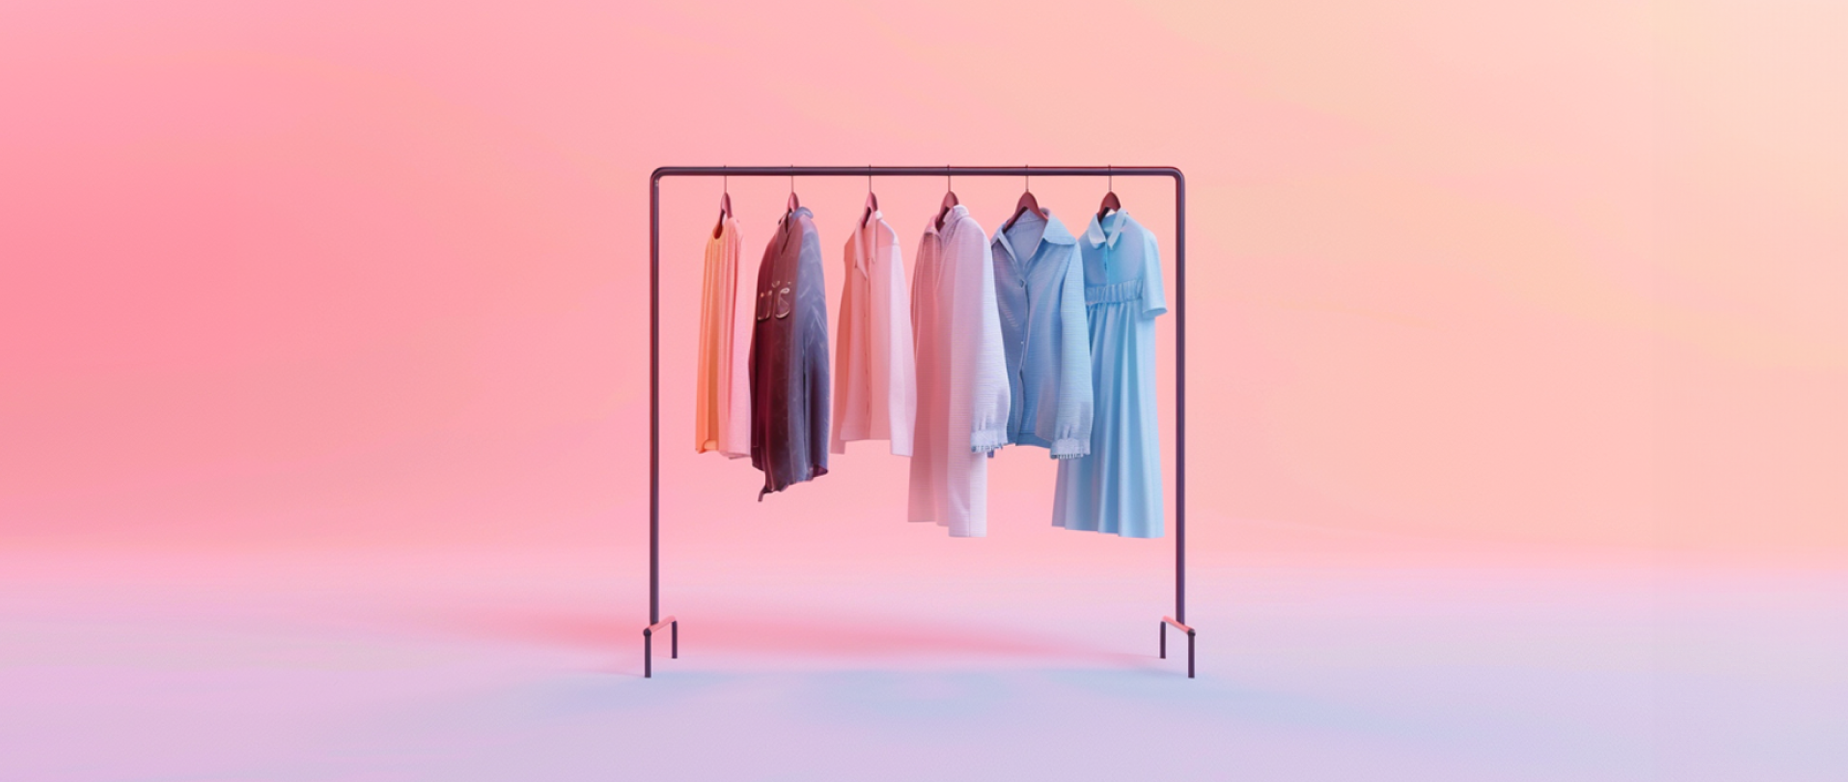 A rack of clothing with a pink background.